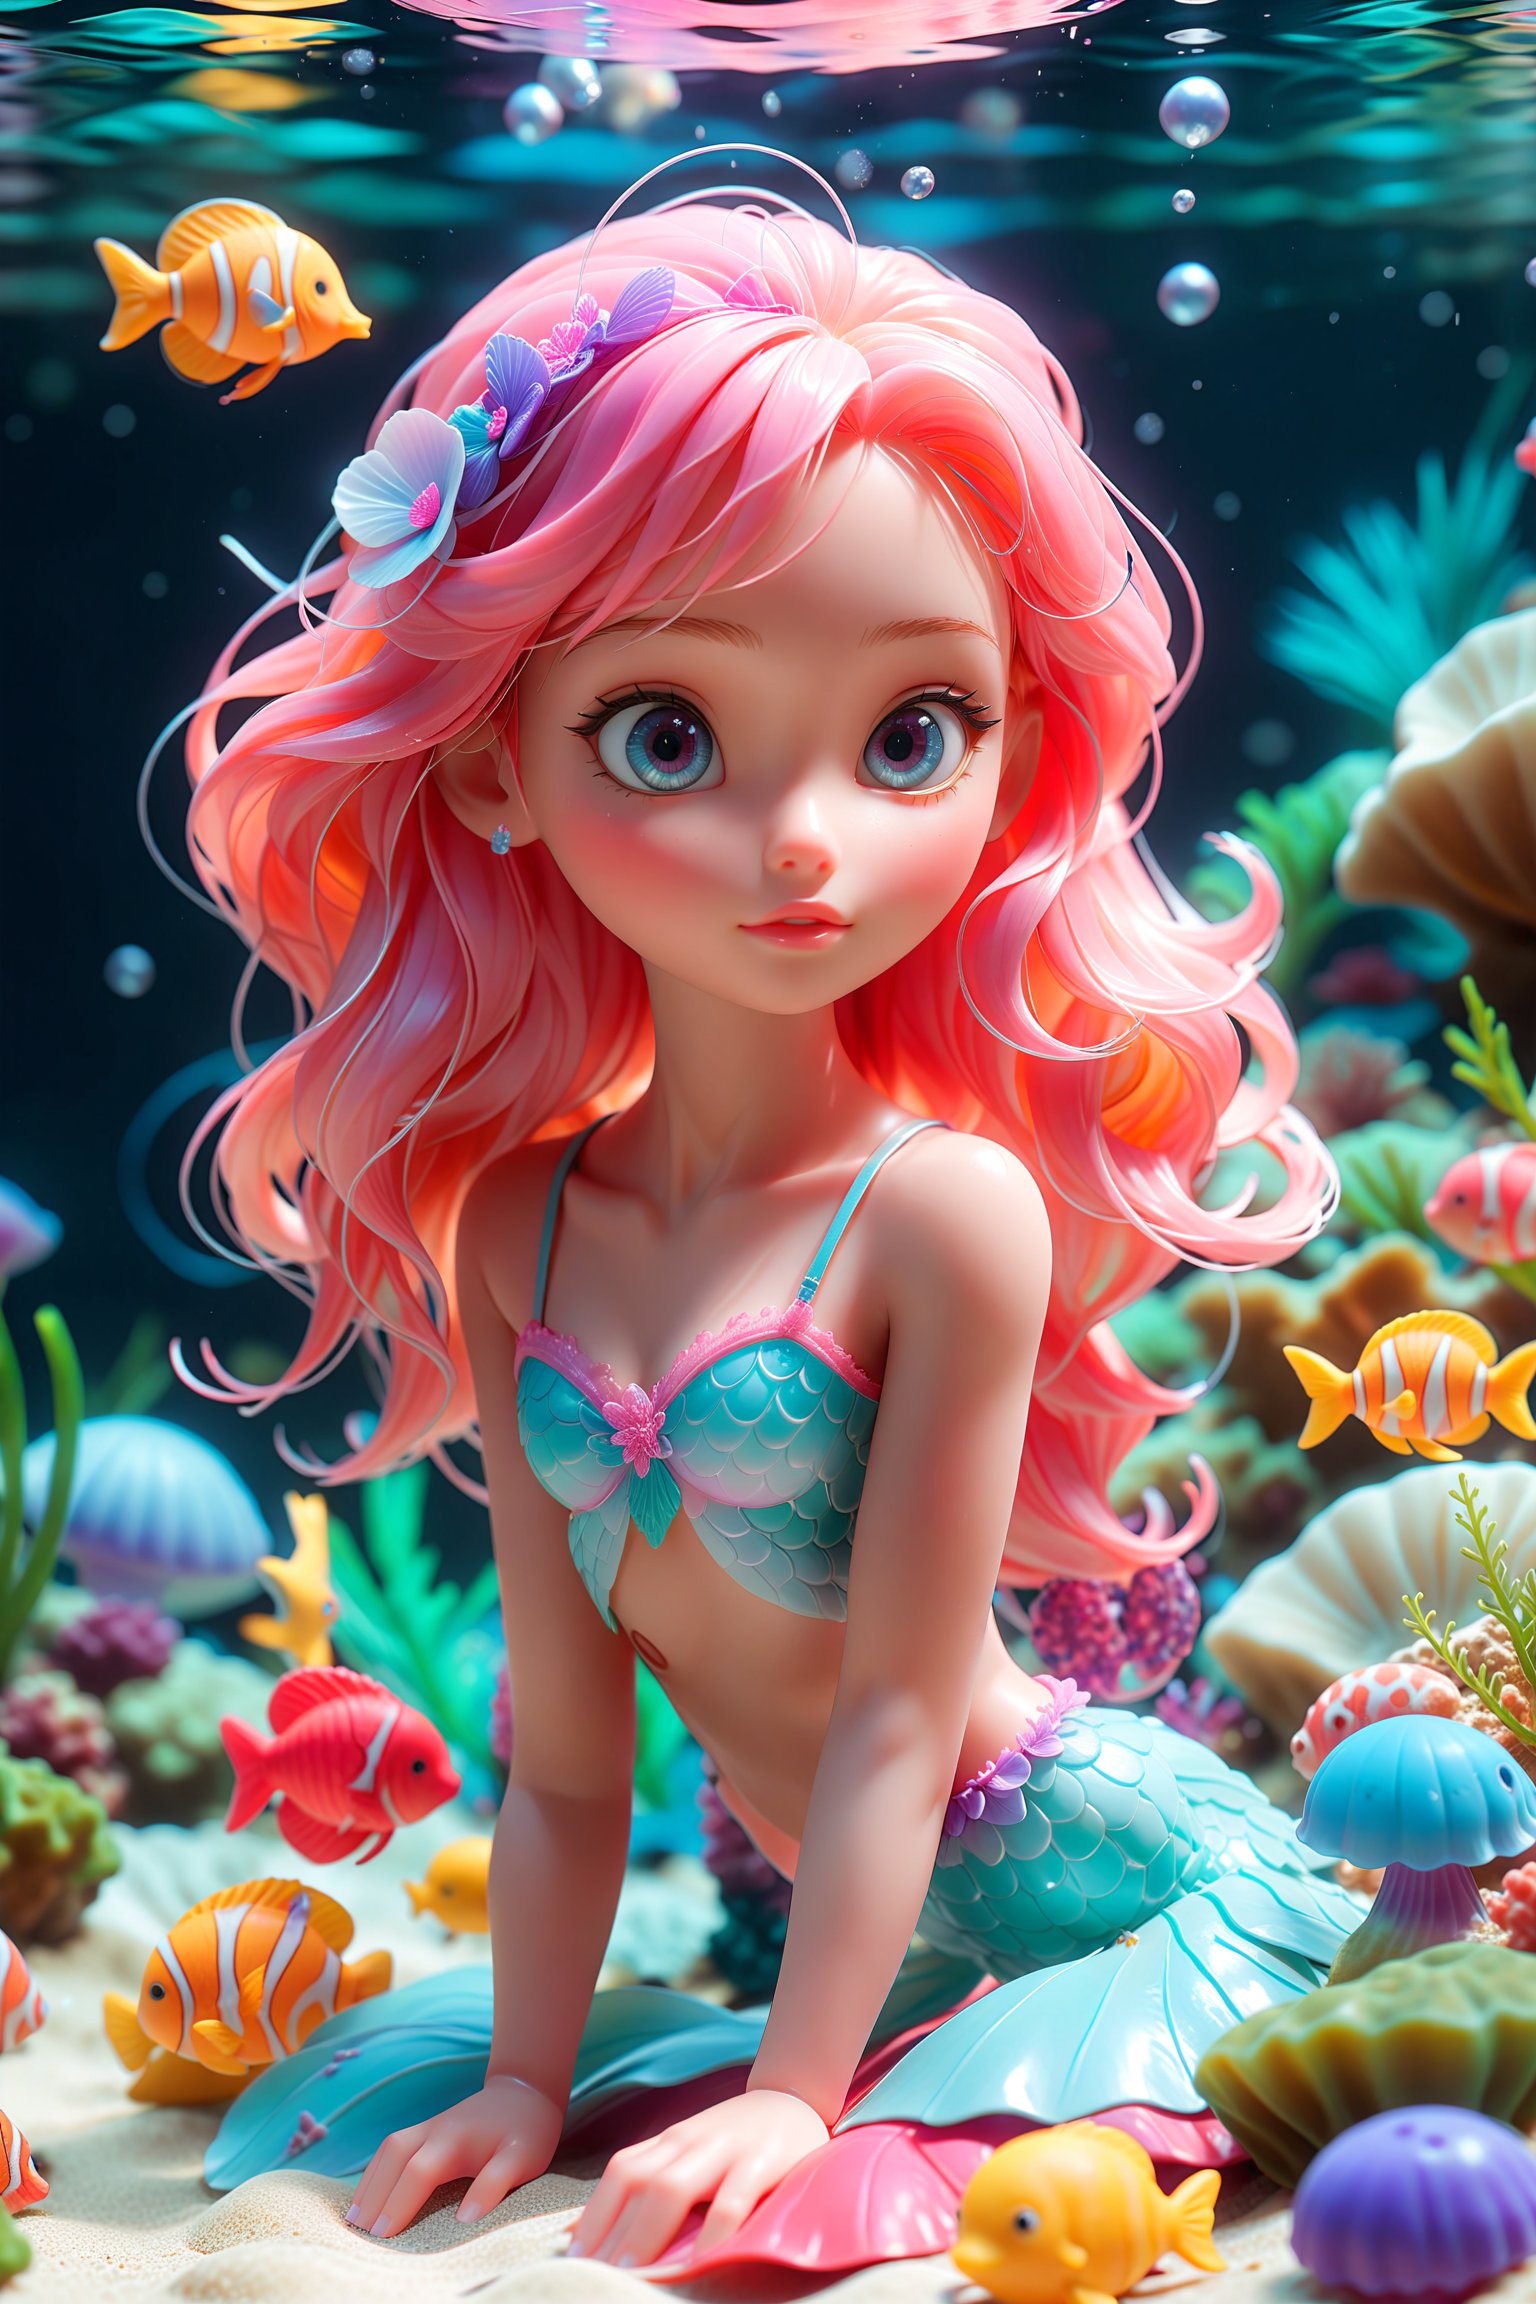 (masterpiece, 3d, doll model, toy, tiny cute, digital art, dynamic light & pose, ethereal quality, extremely detailed, vibrant lighting, colorful, light particles), jellyfishes underwater world, sea jellies, underwater world, a beautiful young model with pink hair, mermaid tail, she between colorful magic jellyfishes